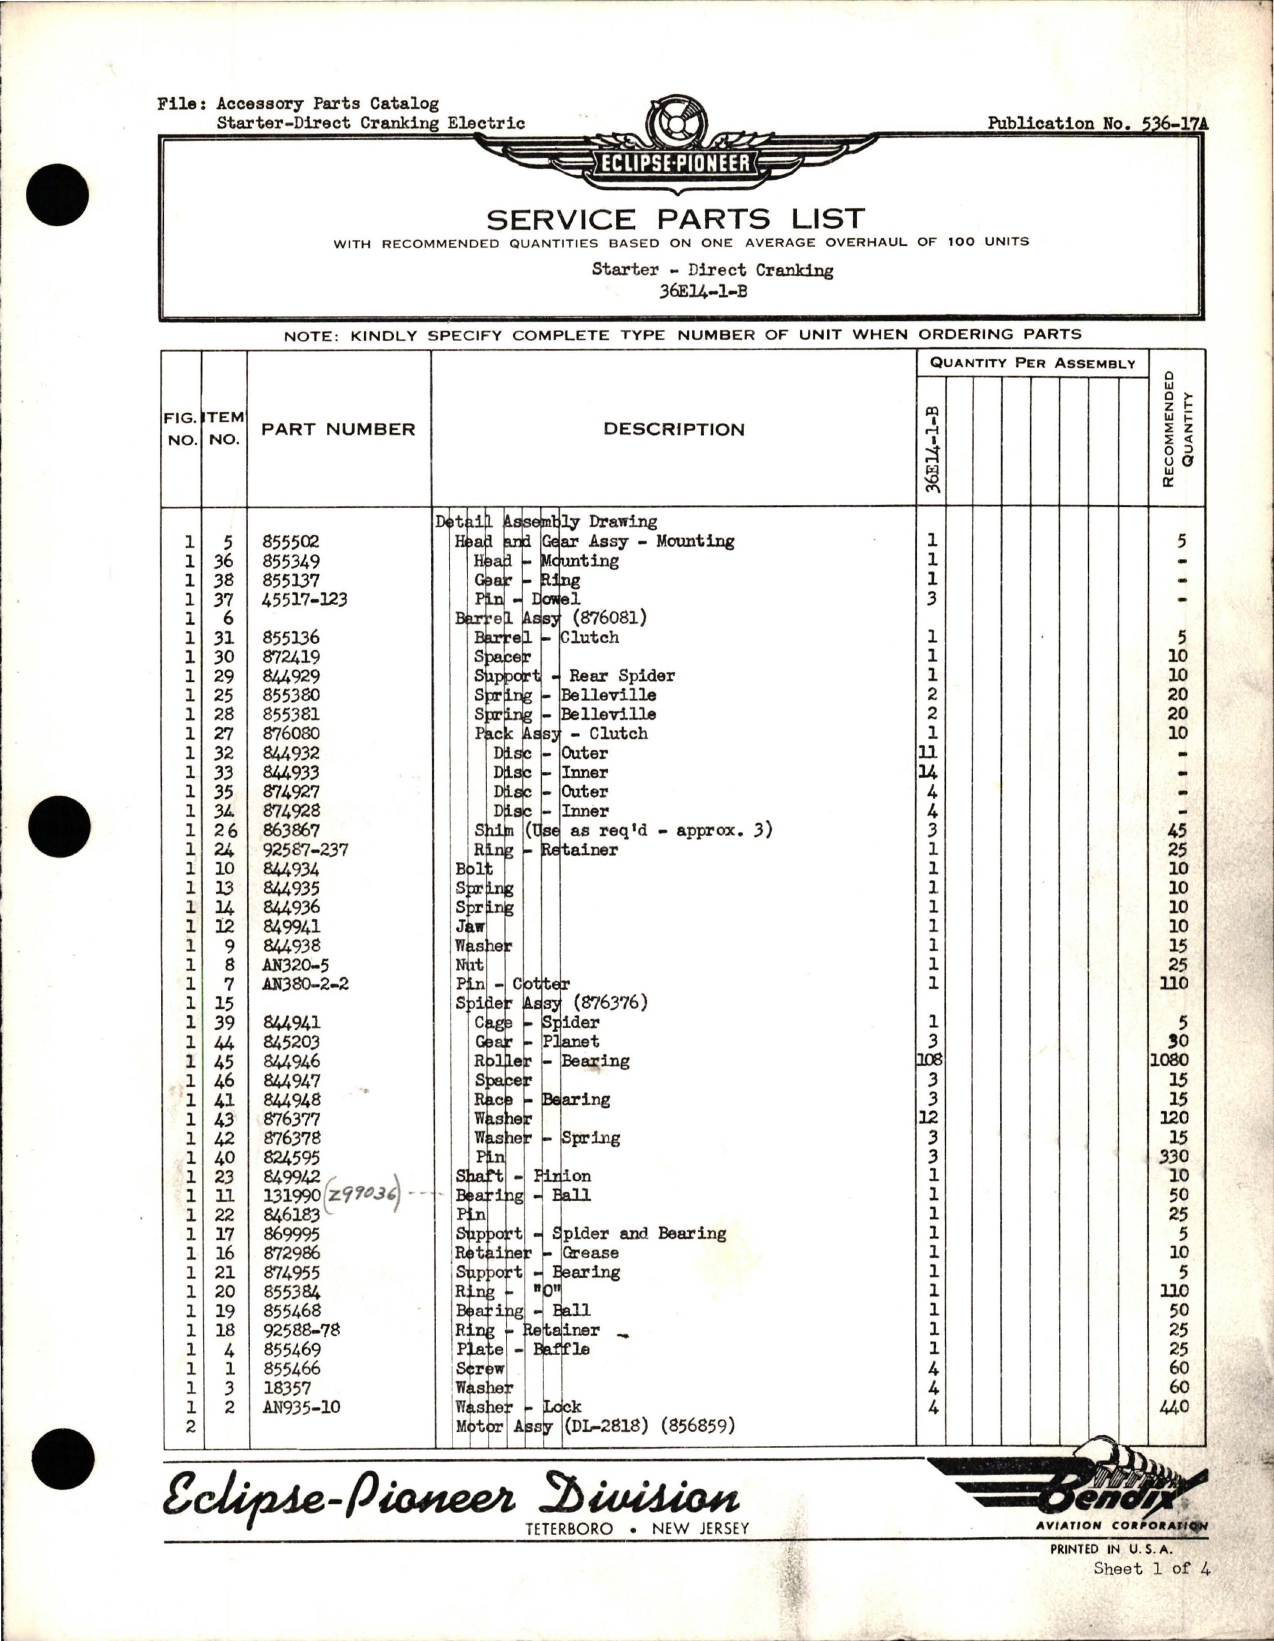 Sample page 1 from AirCorps Library document: Service Parts List for Direct-Cranking Starter - 36E14-1-B